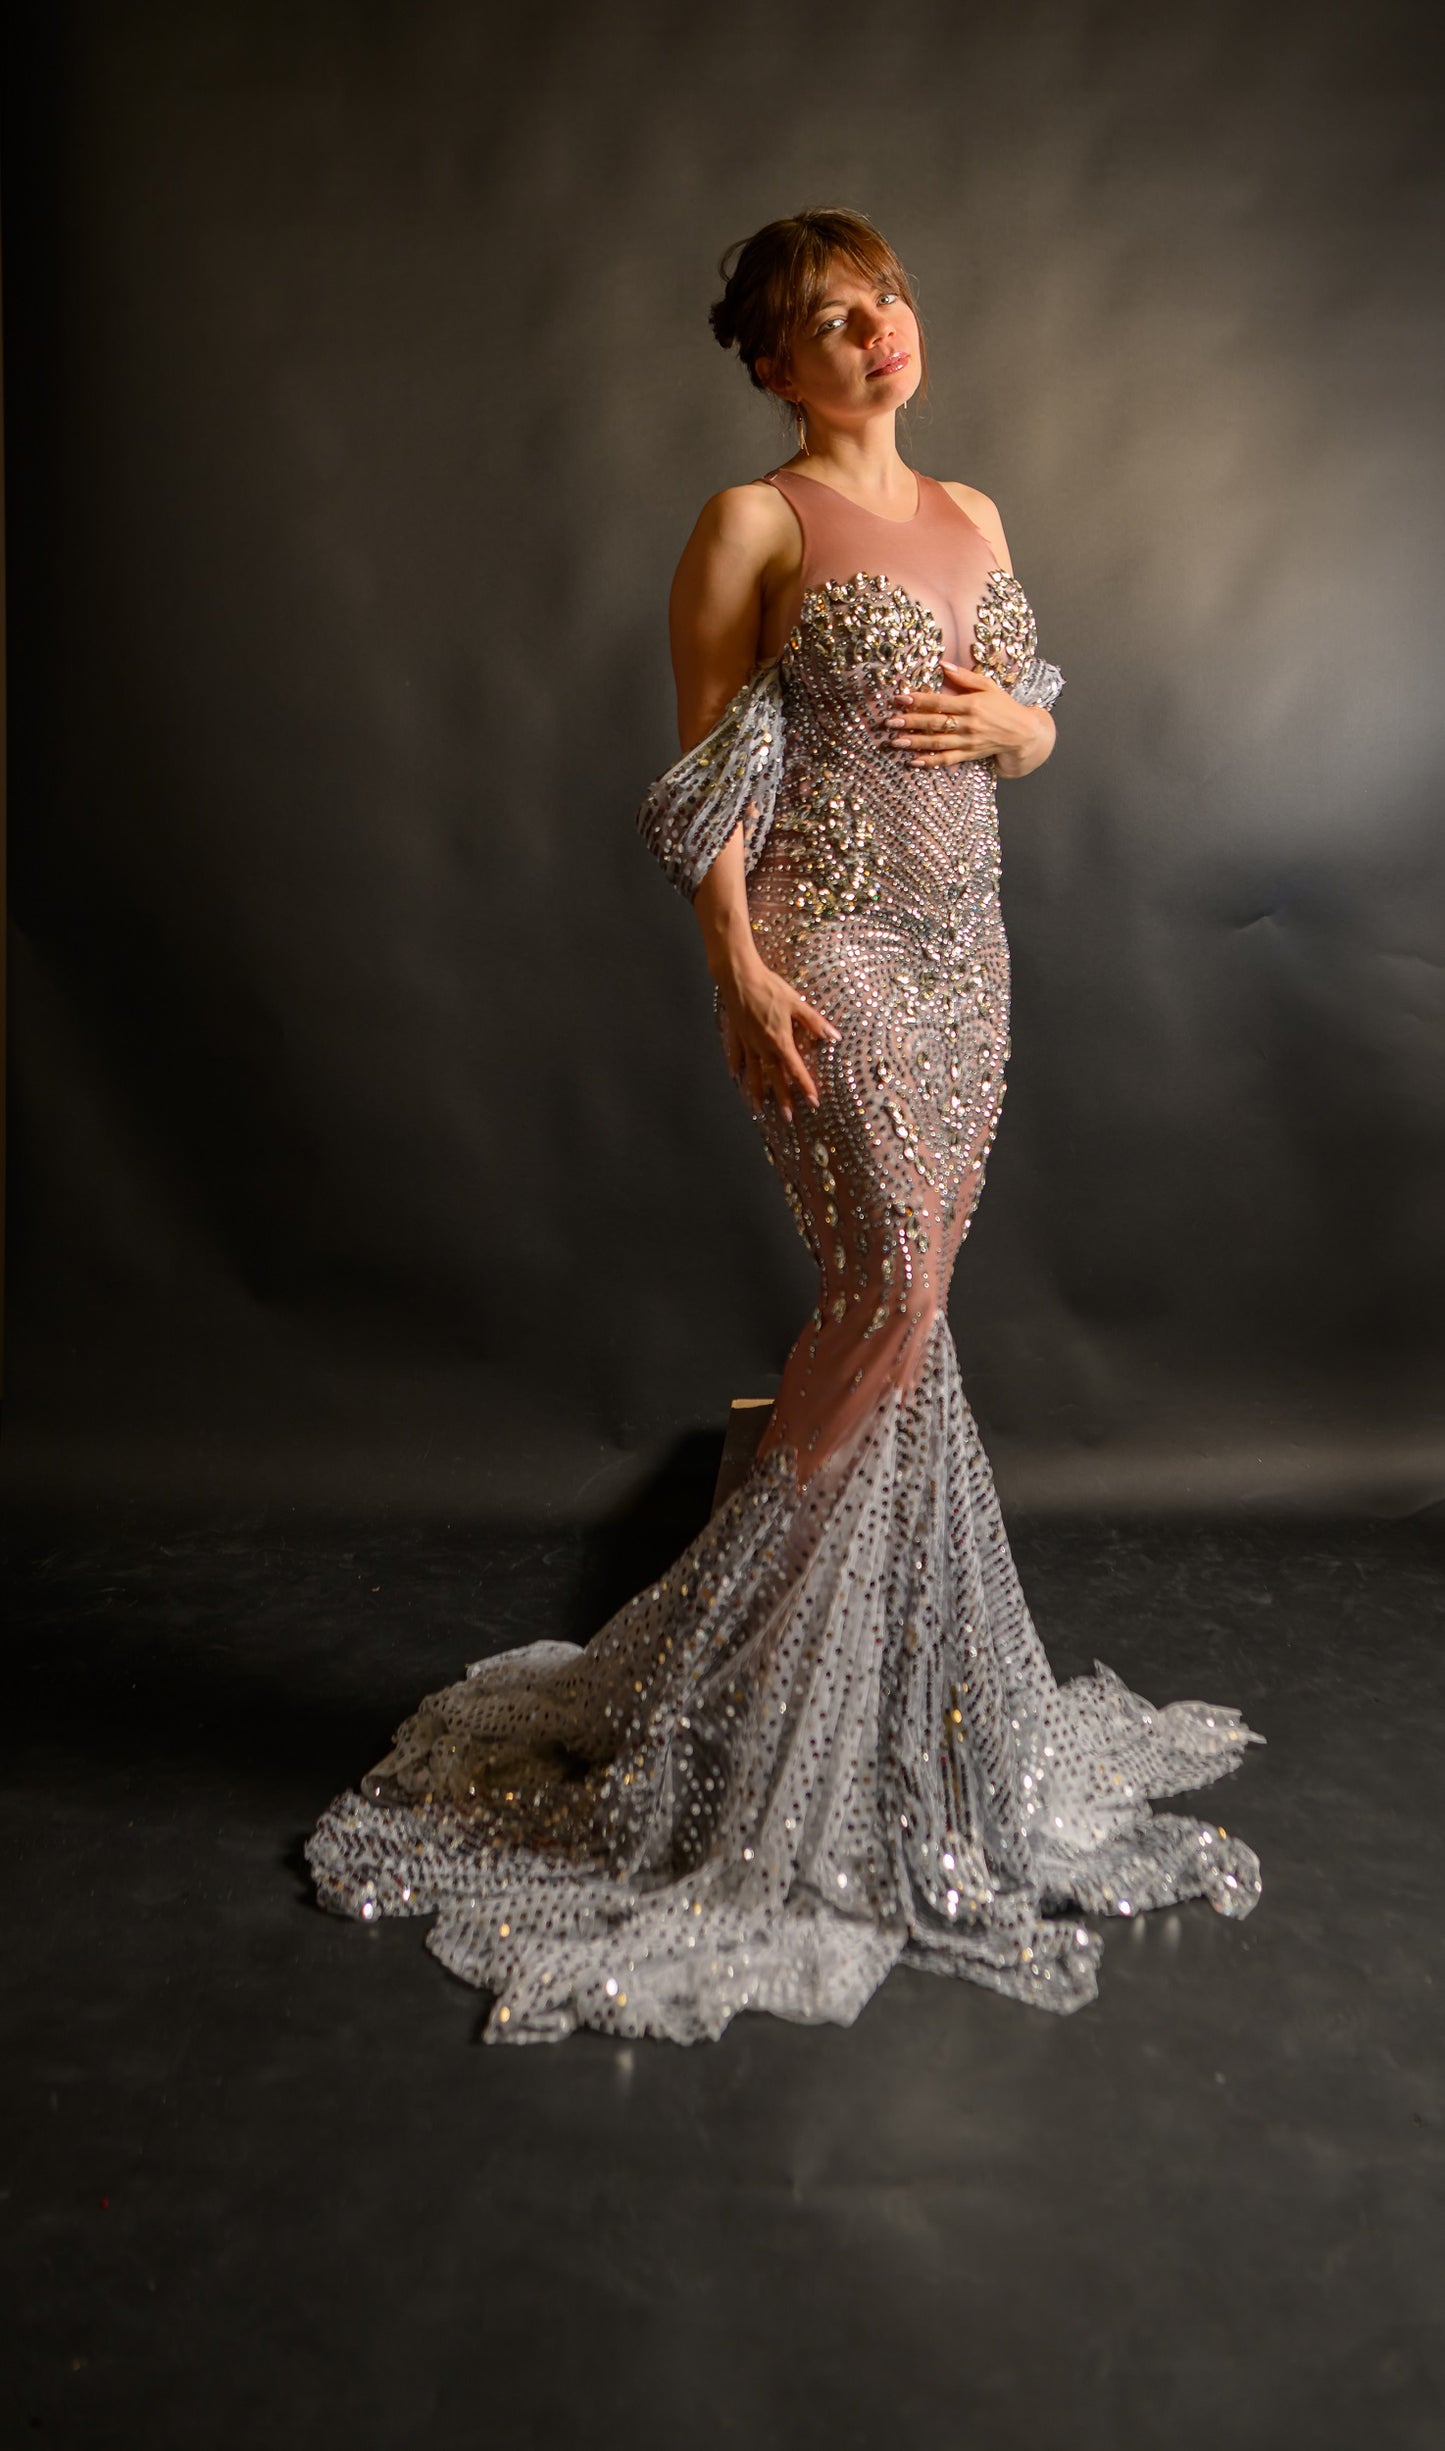 "Mermaid" Shining Silver Sequins Crystals Transparent Long Party Dress